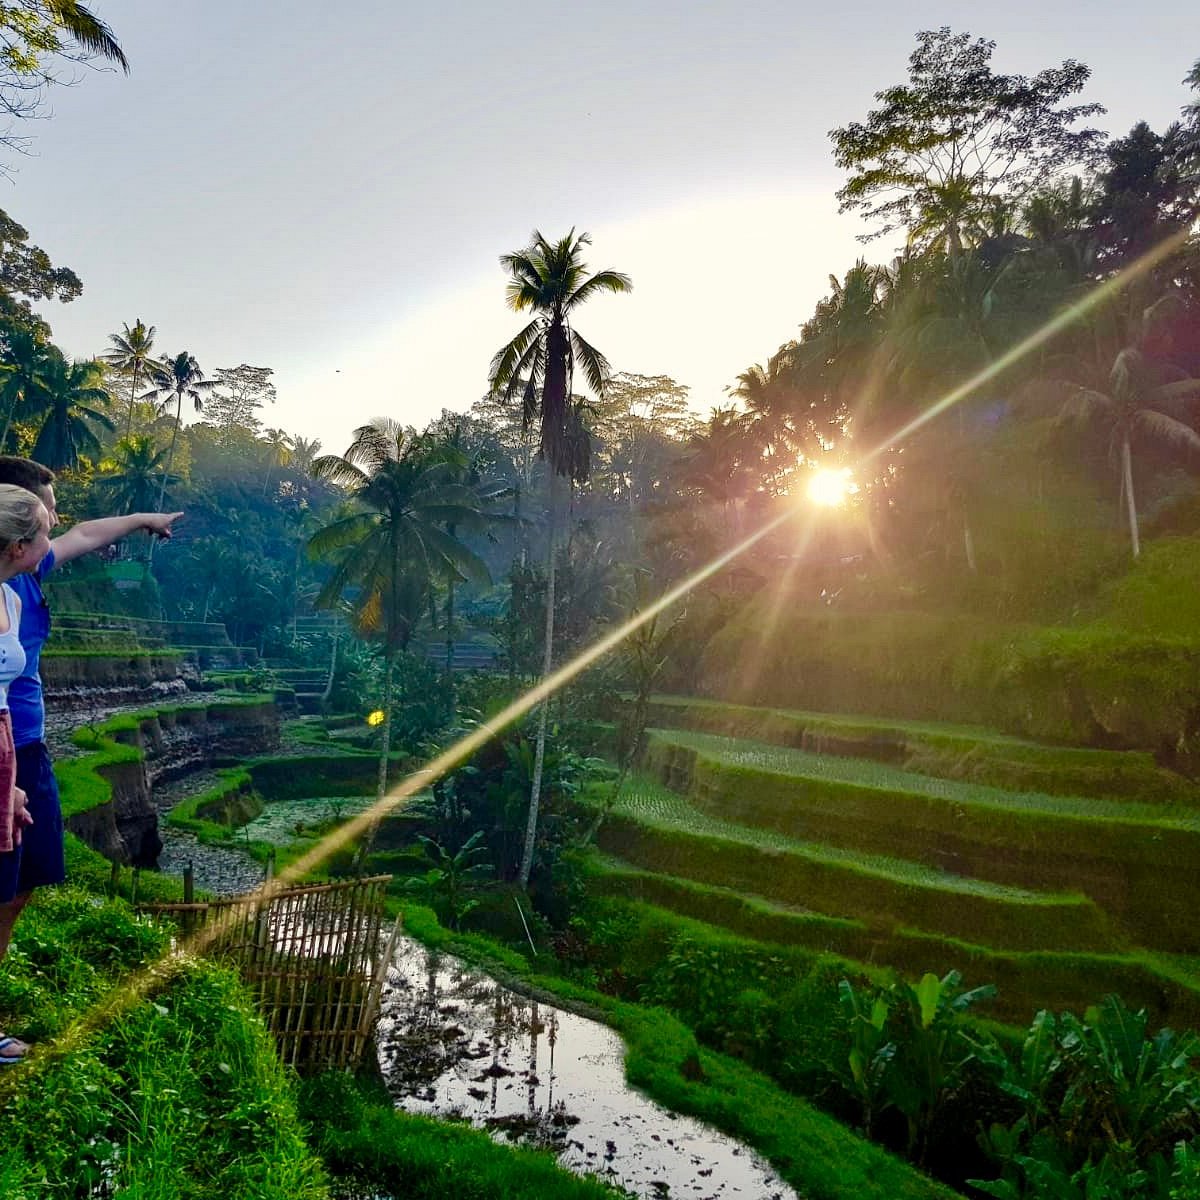 Bali Travel Expert (Ubud) - All You Need to Know BEFORE You Go